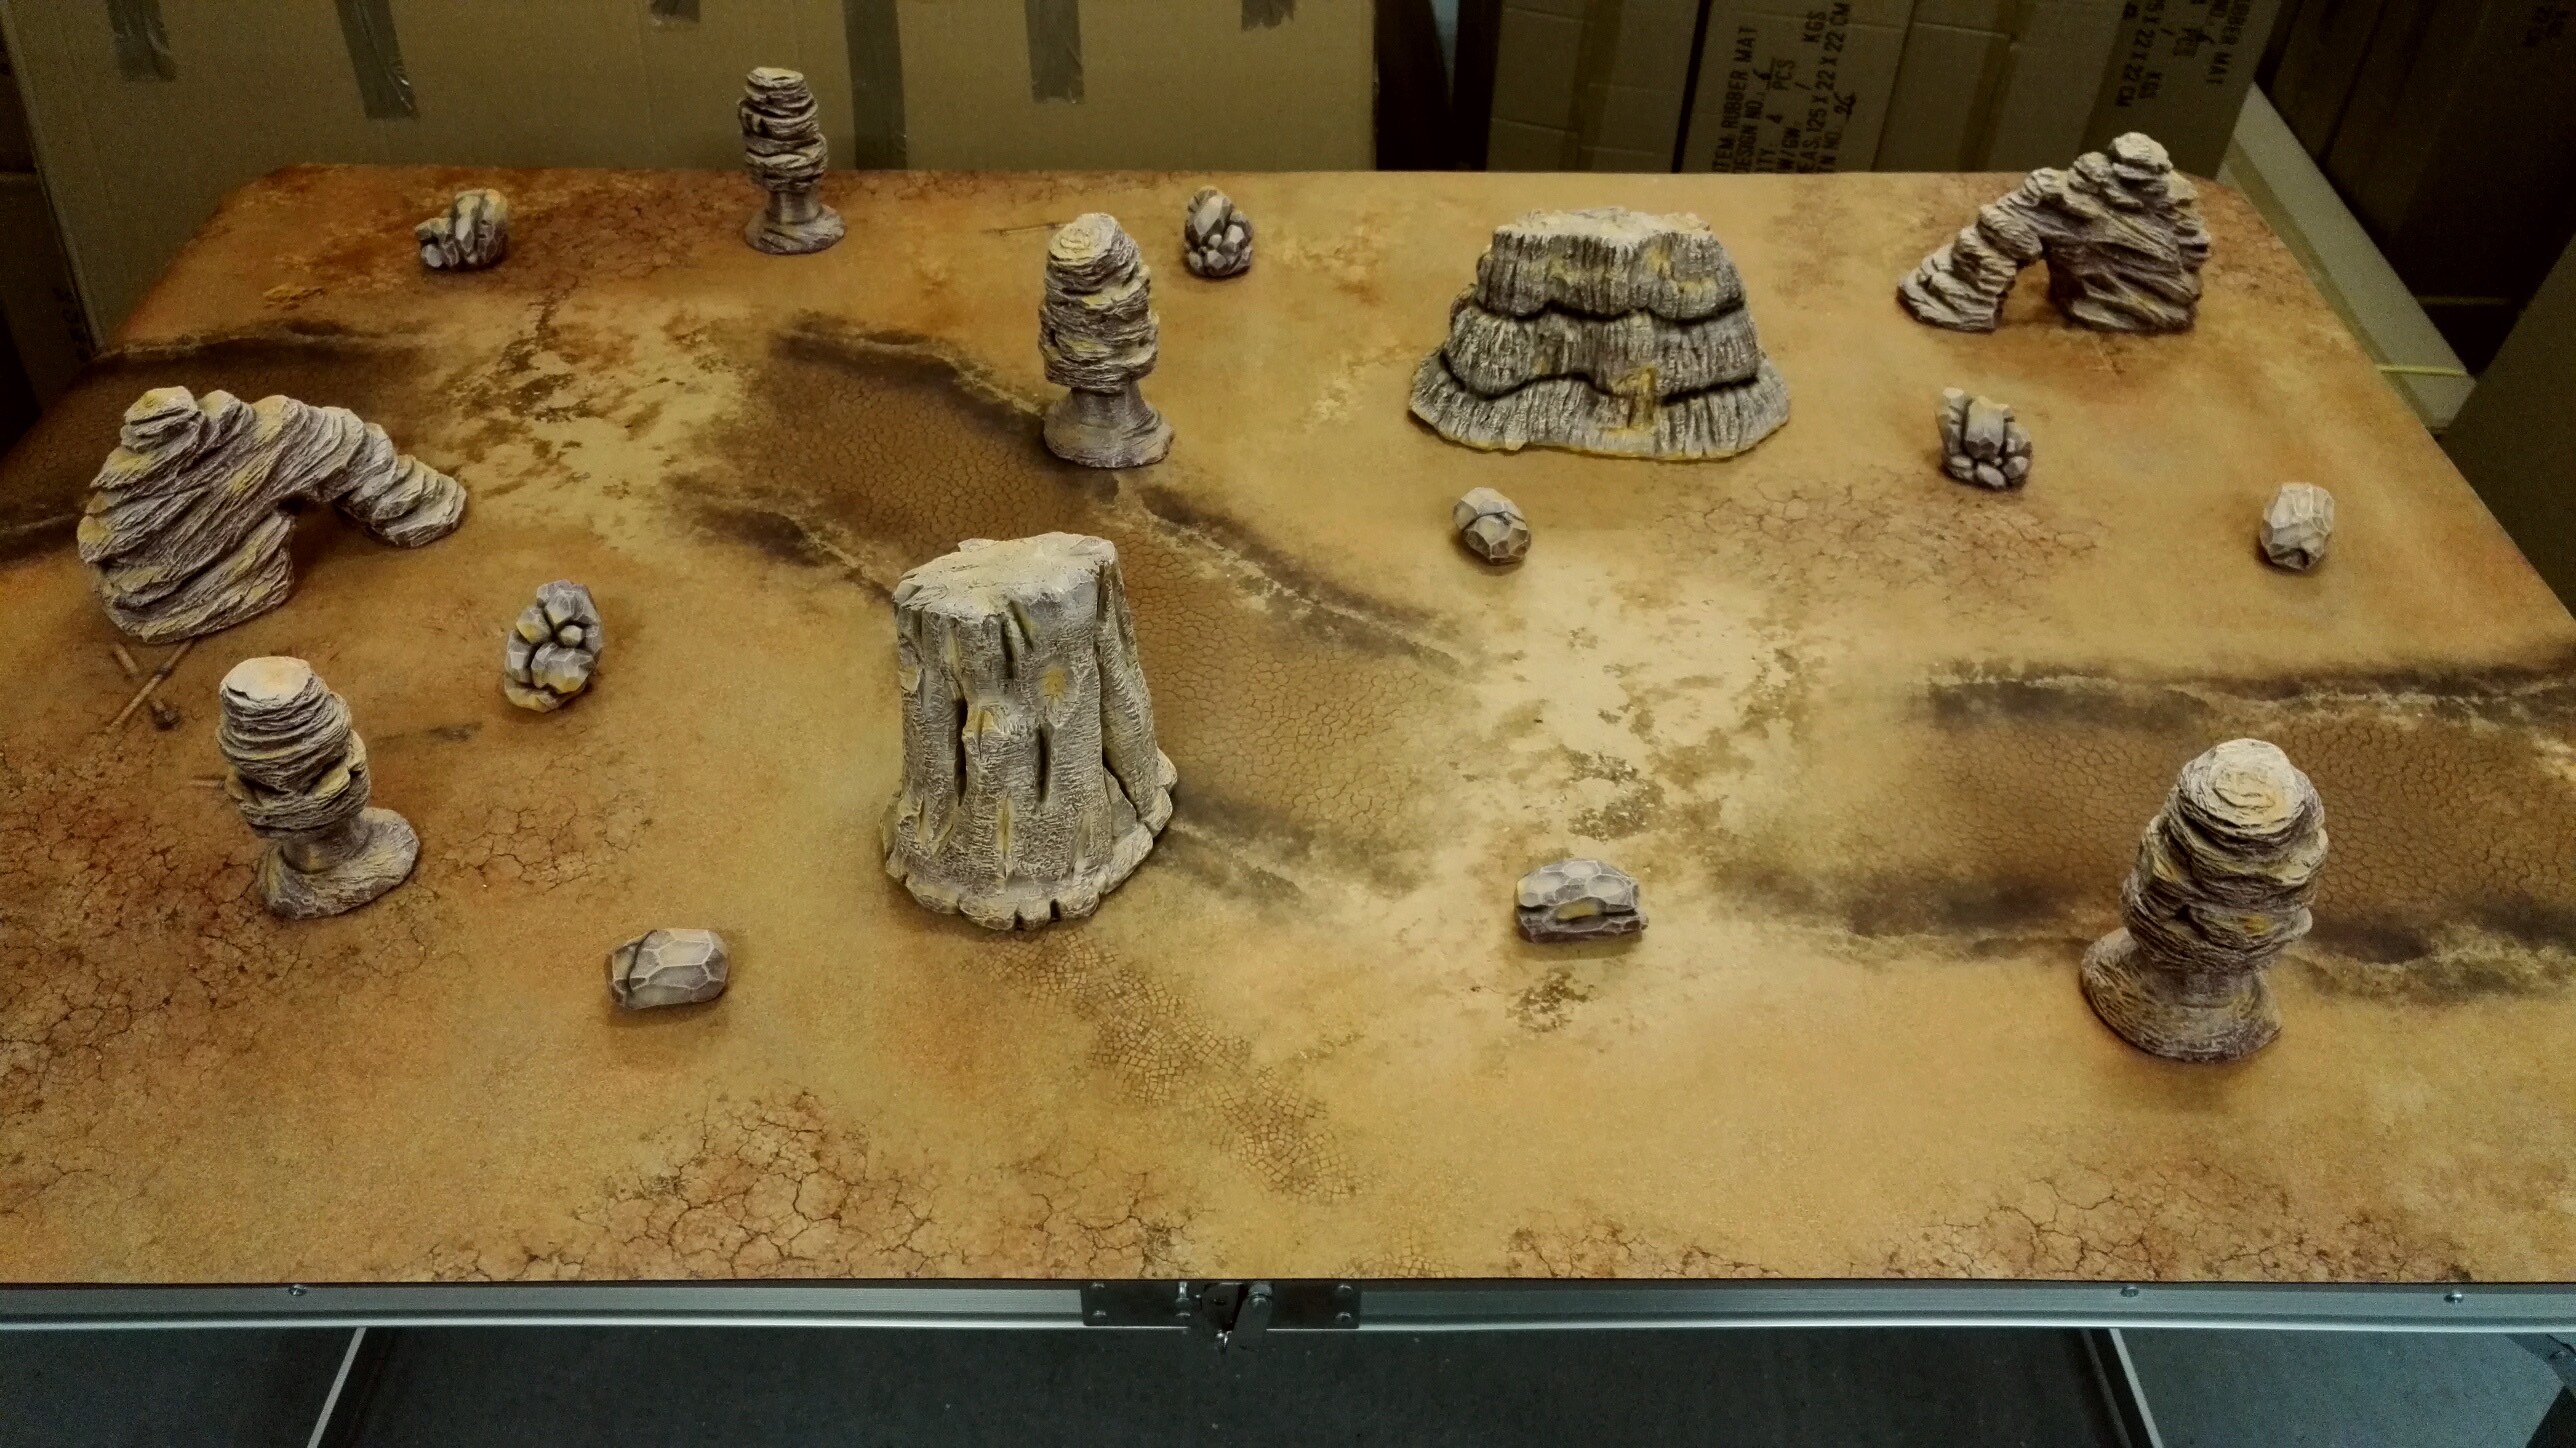 New pre-painted resin scenery